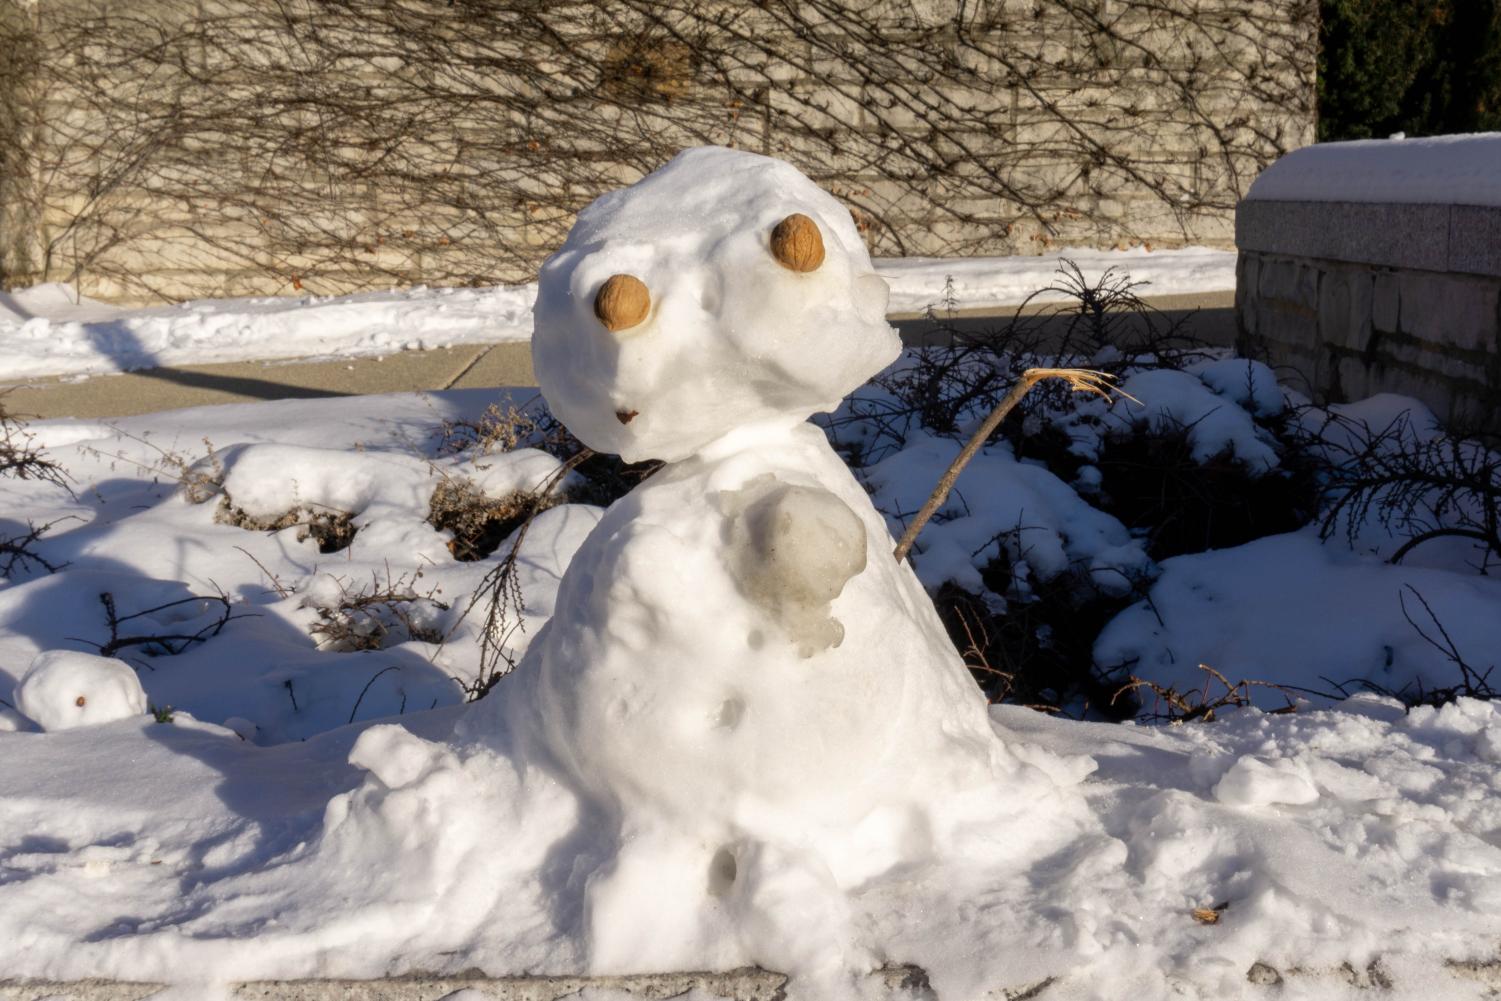 A small snowman with walnuts for eyes.